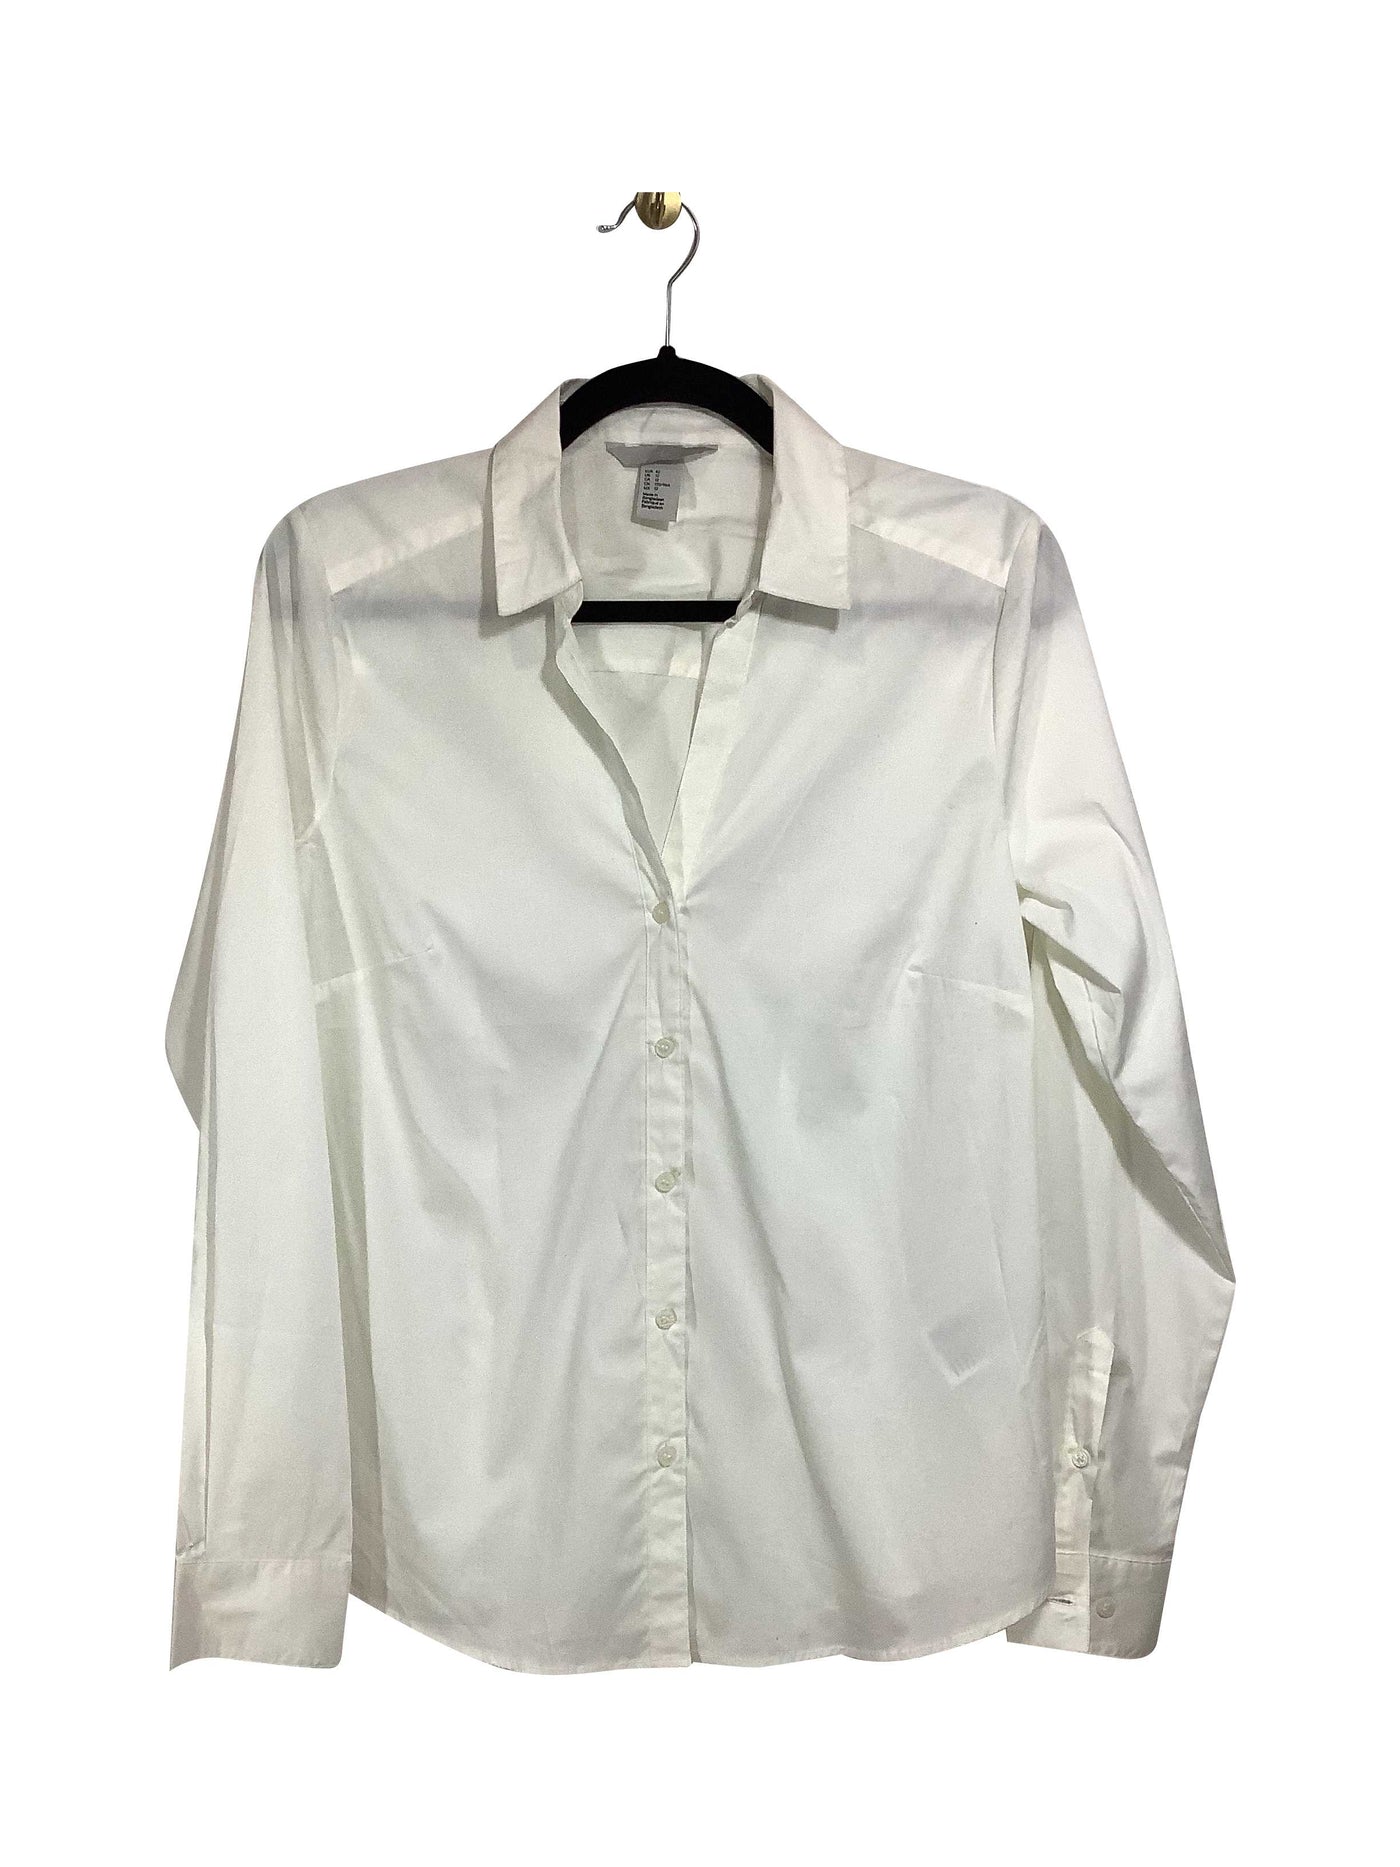 H&M Regular fit Button-down Top in White - Size 12 | 9.99 $ KOOP